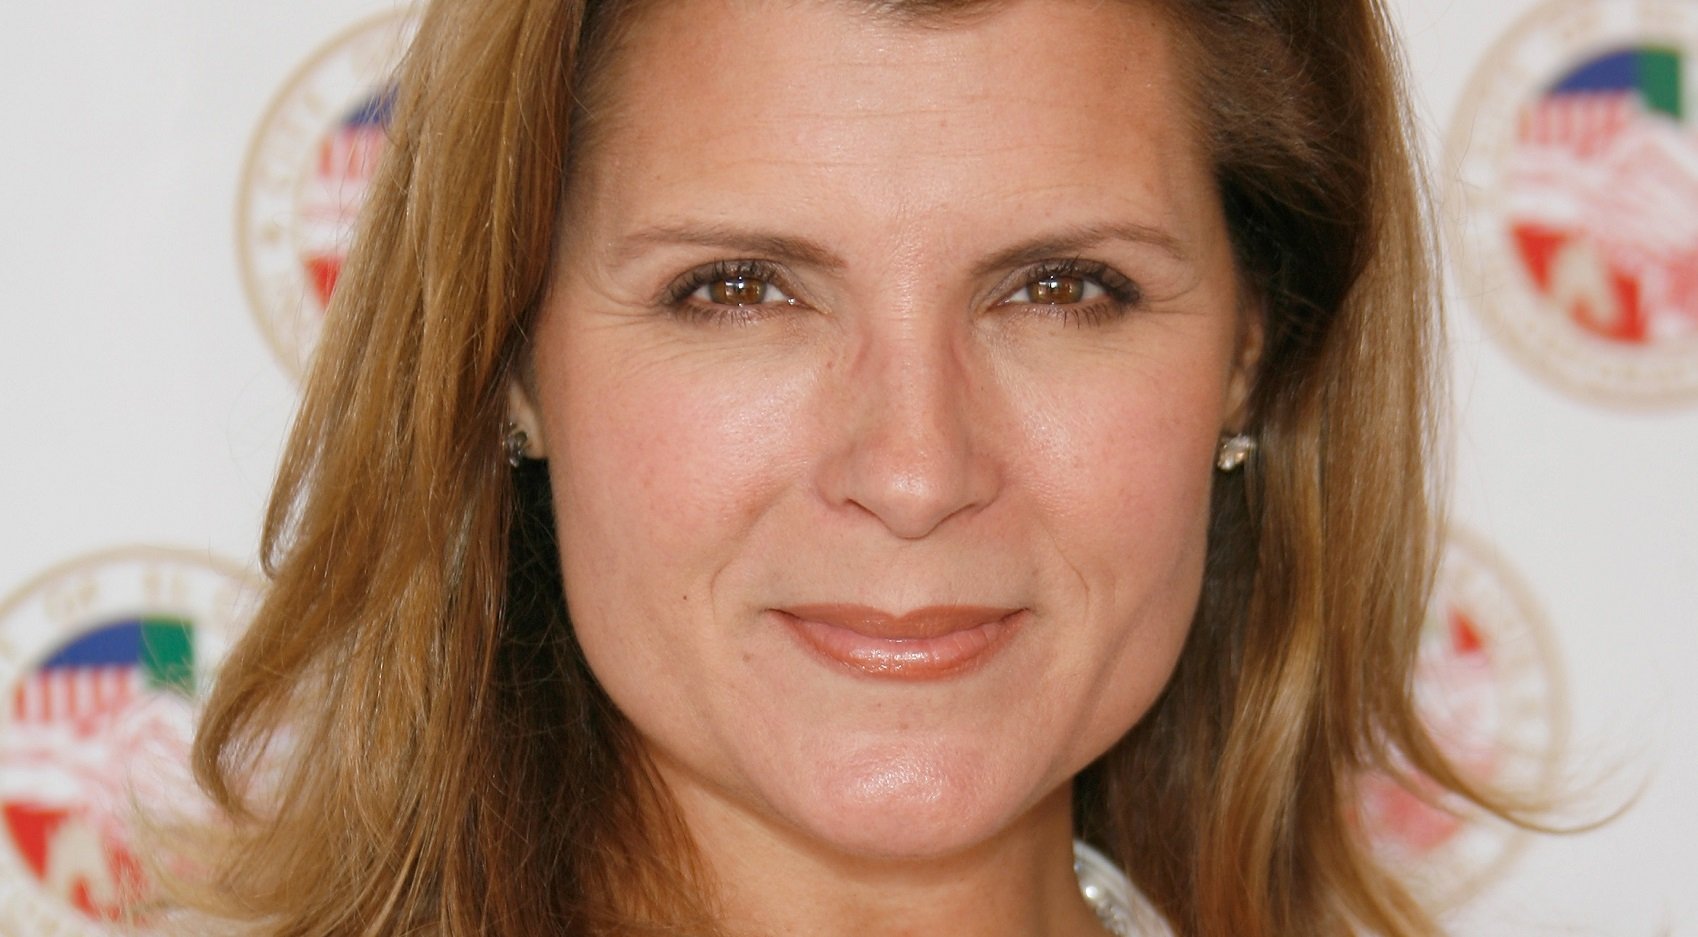 The Bold and the Beautiful star Kimberlin Brown, who plays Sheila Carter